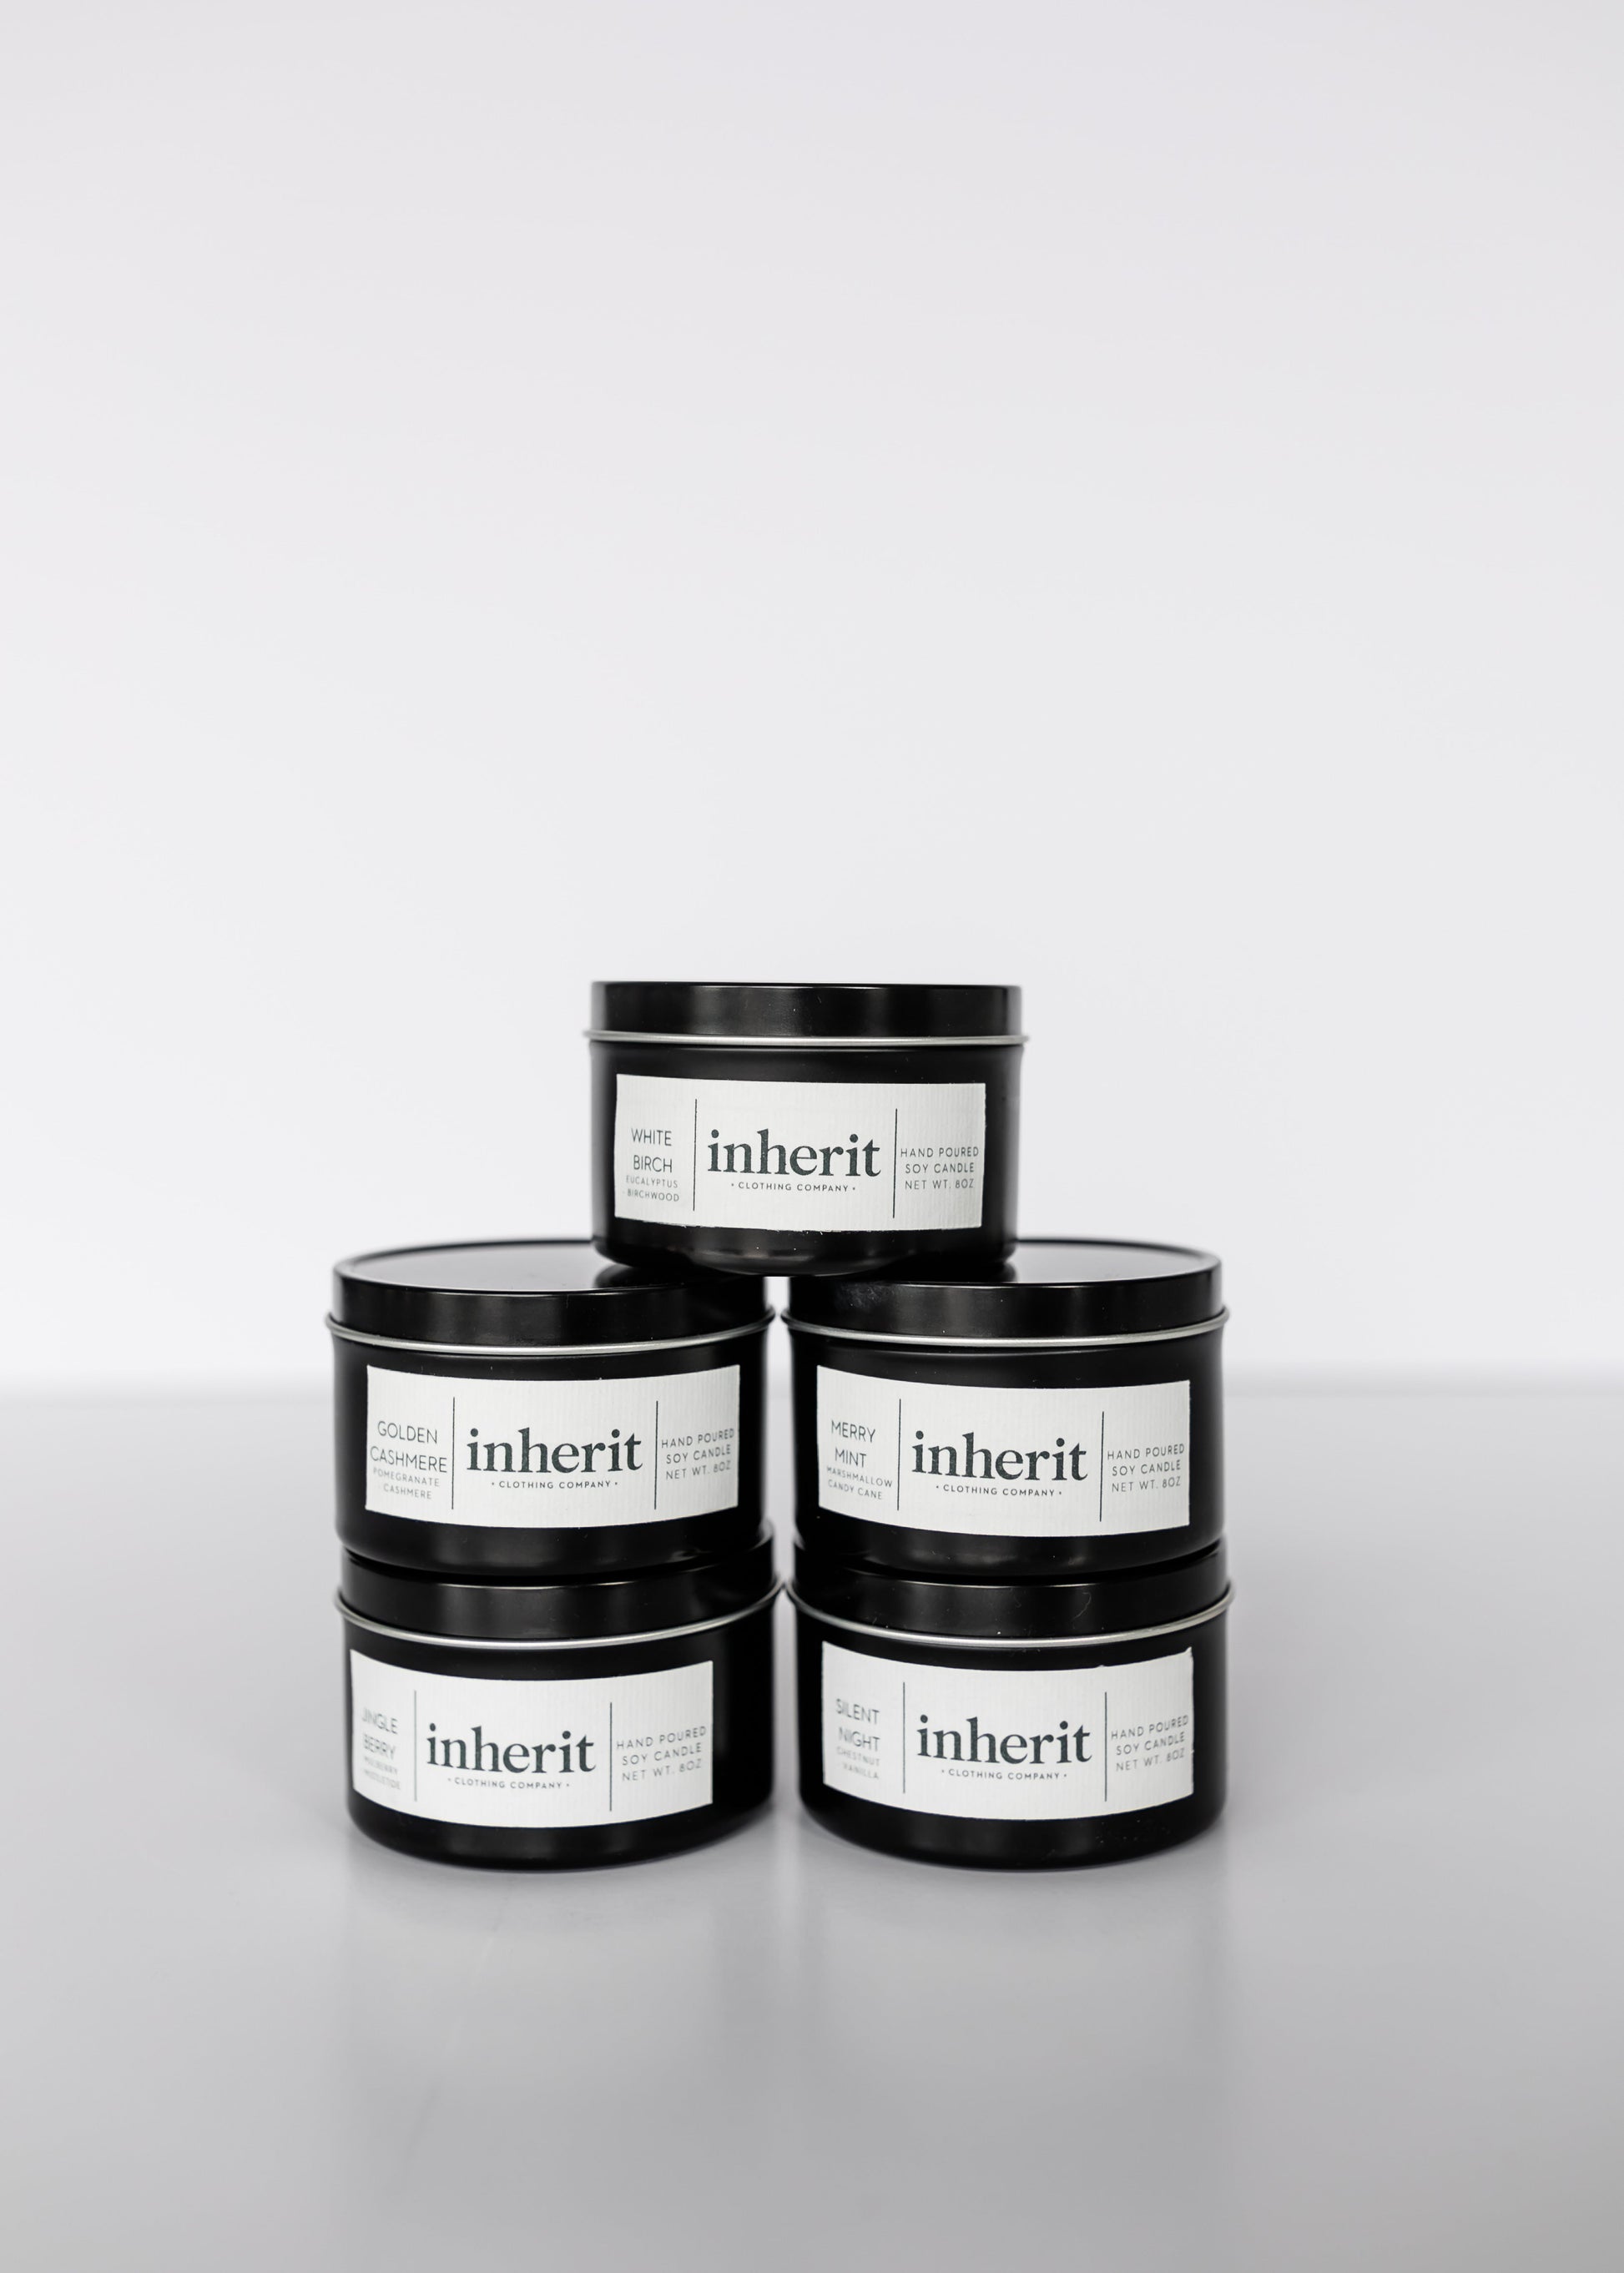 Inherit Winter Scented Soy Candle 8oz. - FINAL SALE Gifts